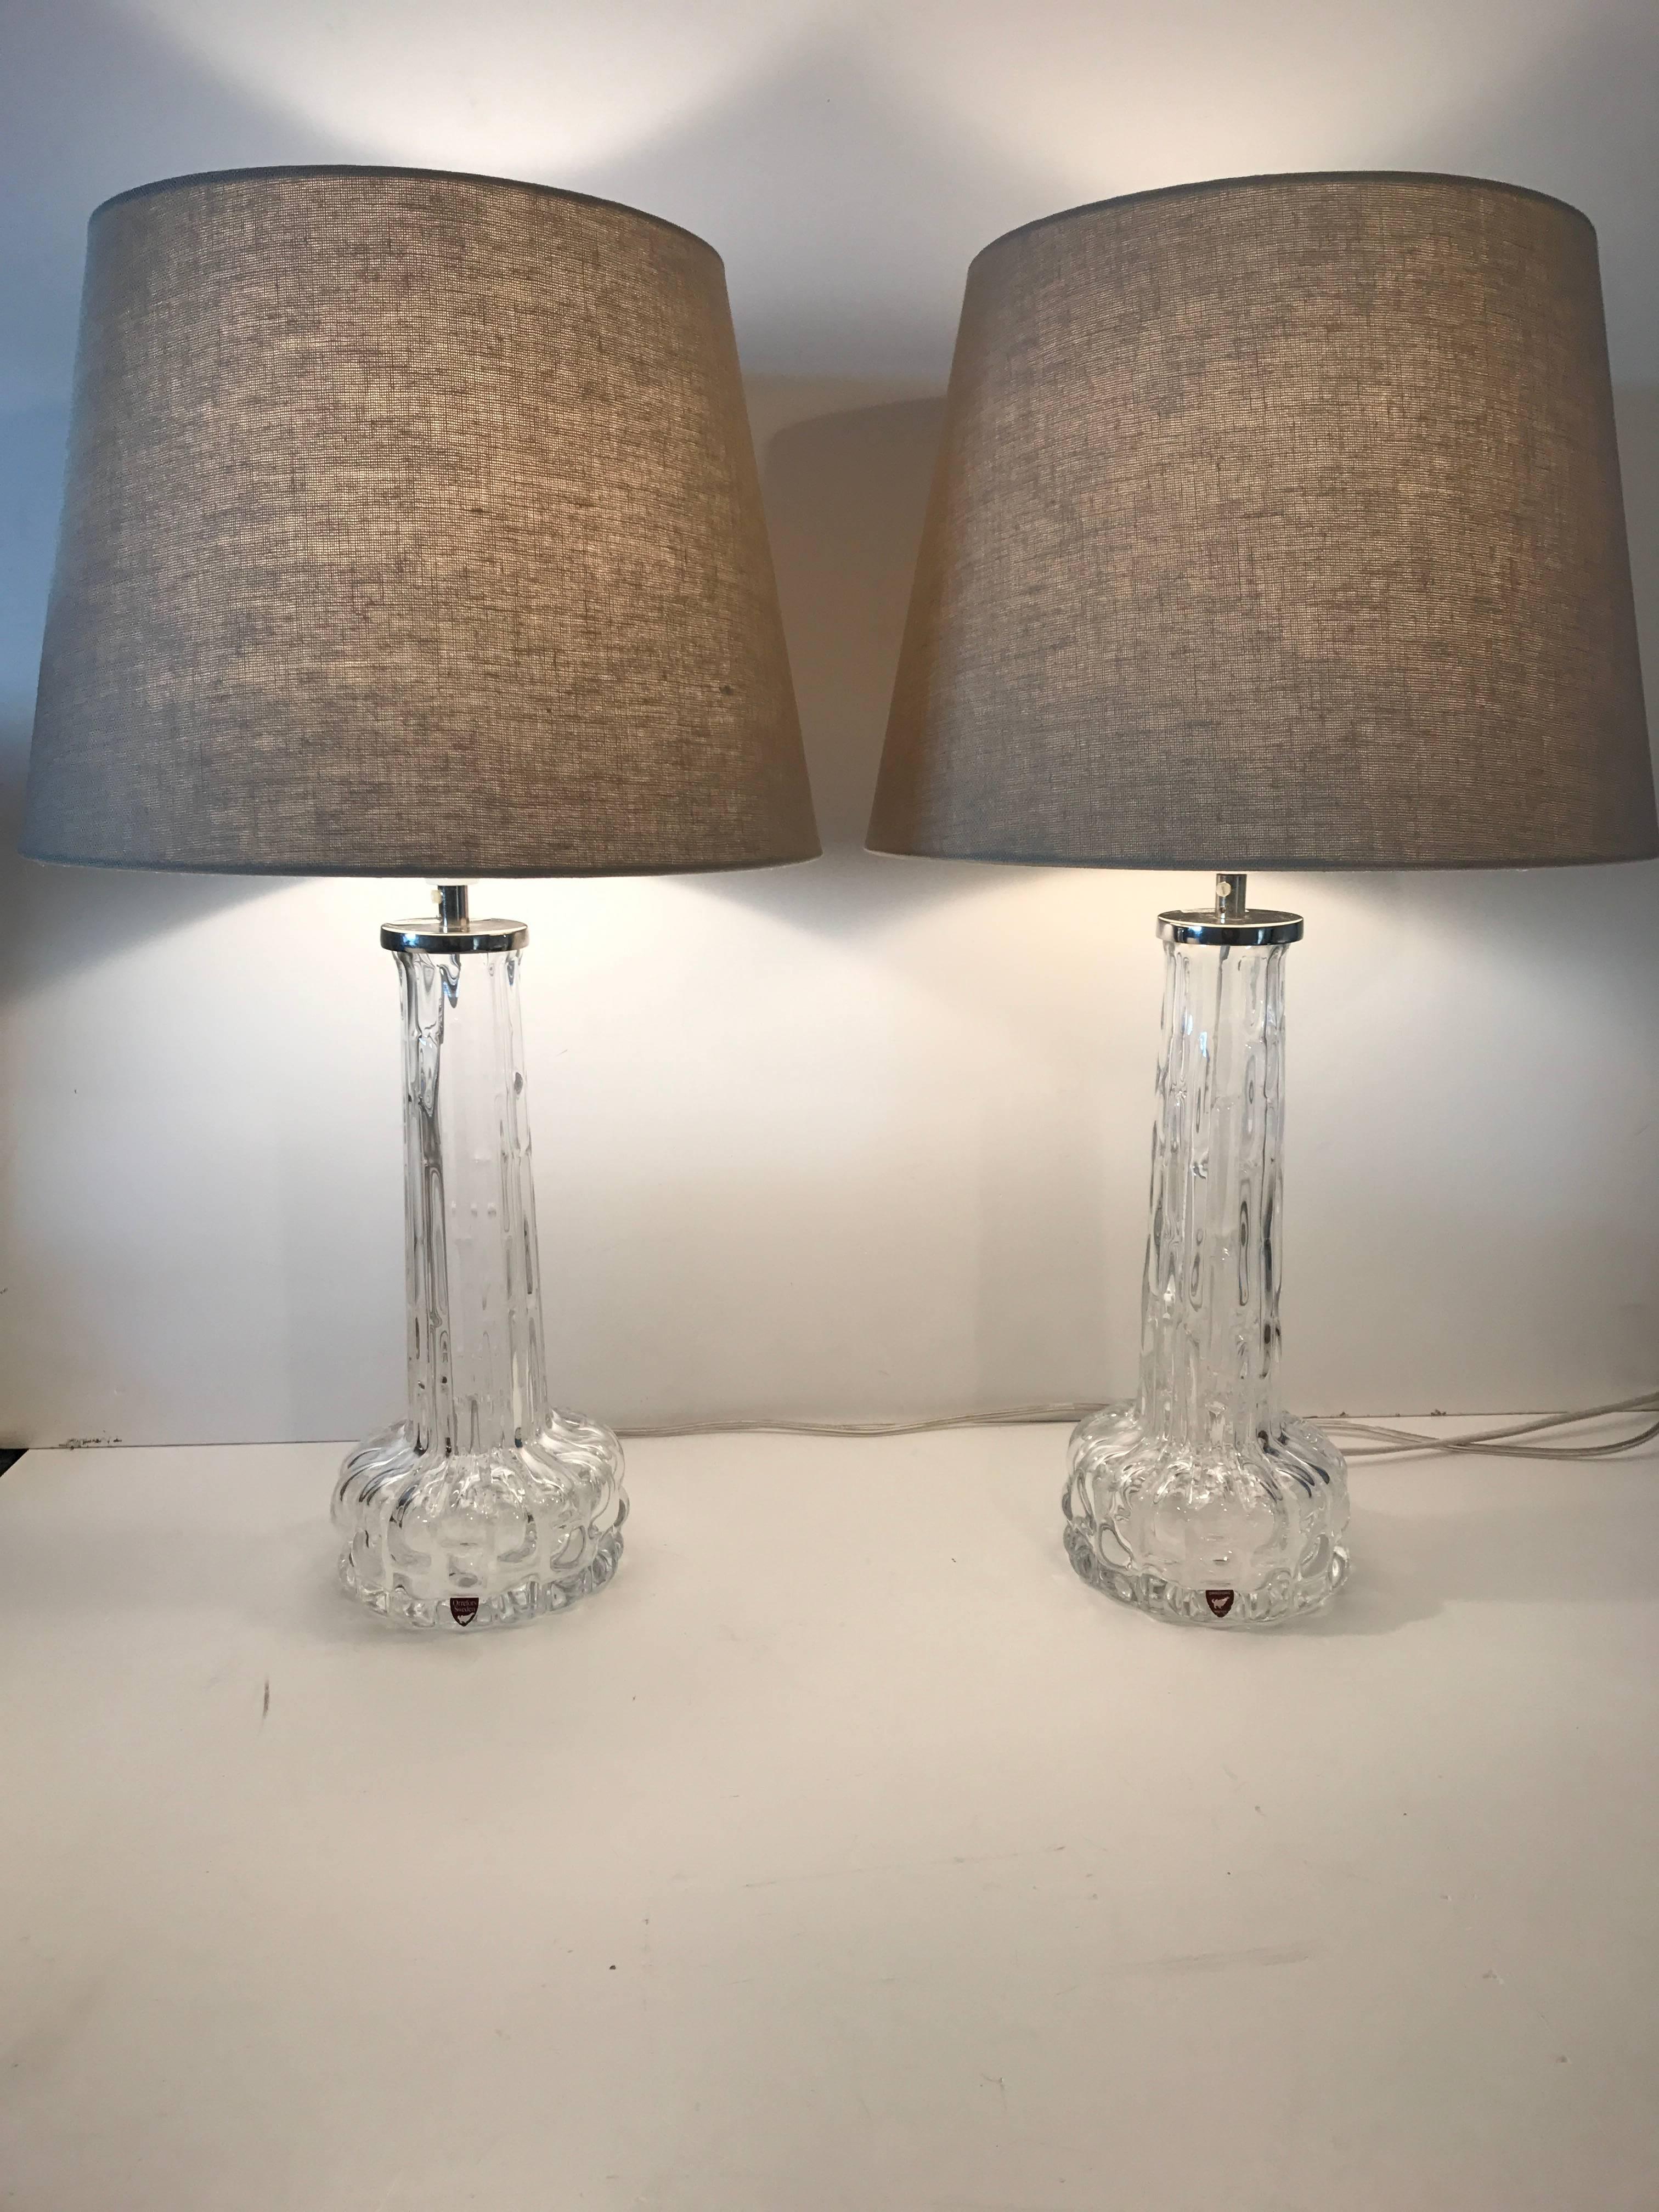 Swedish Orrefors 1955 art glass table lamps by Carl Fagerlund.
A beautiful pair of table lamps designed by Carl Fagerlund at Orrefors Sweden. This pair is in perfect condition without any damages. The height is 55cm and the diameter of the shade is